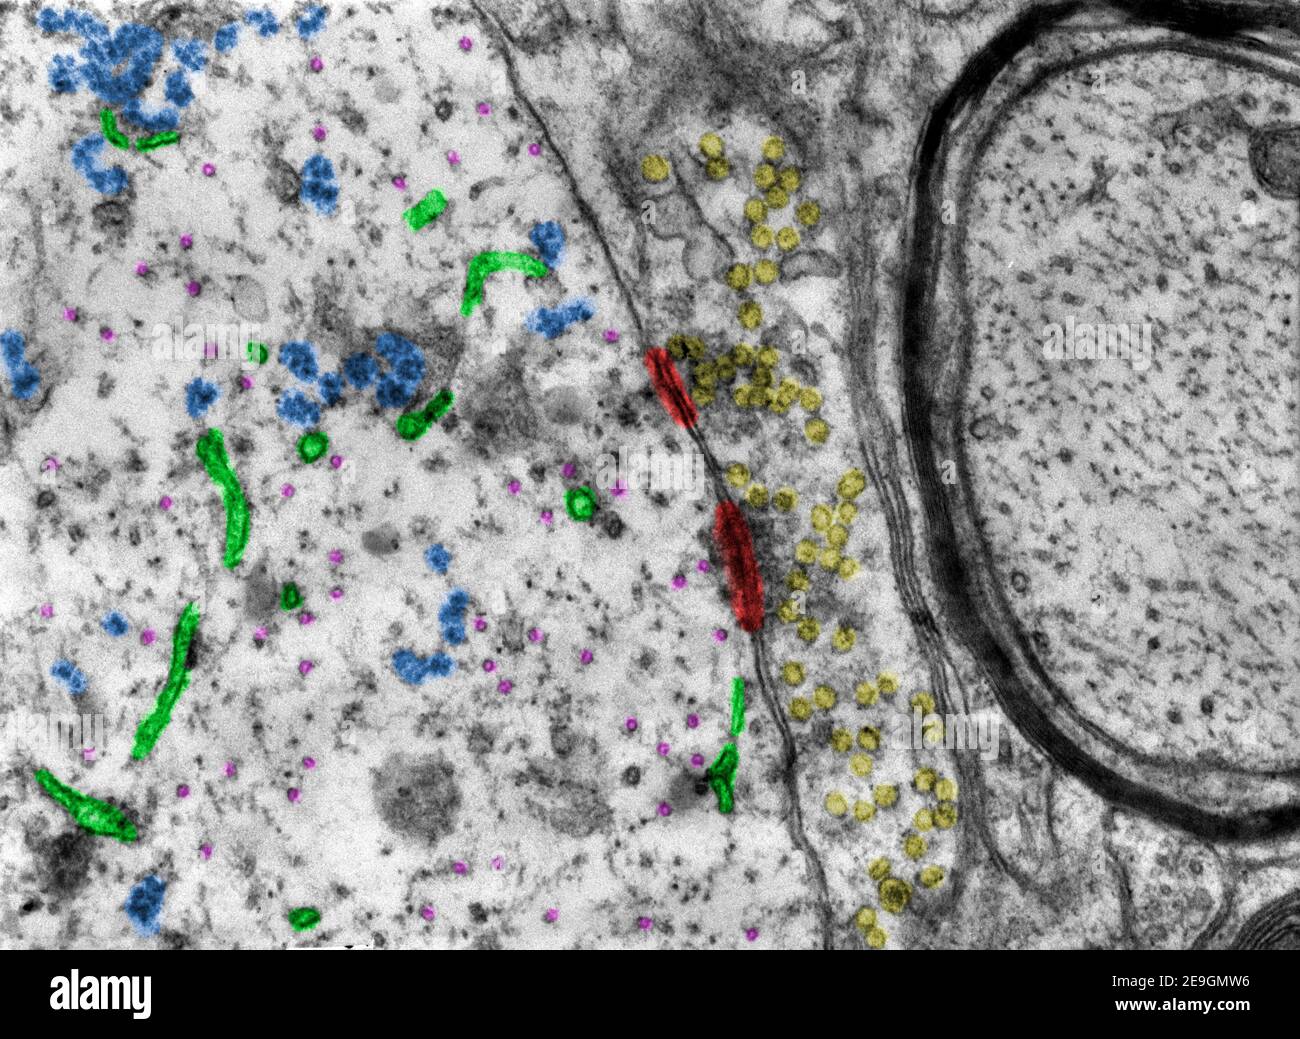 False colour transmission electron microscope (TEM) micrograph showing two synapses. Synaptic densities=red. Synaptic vesicles=yellow. Ribosomes=blue. Stock Photo